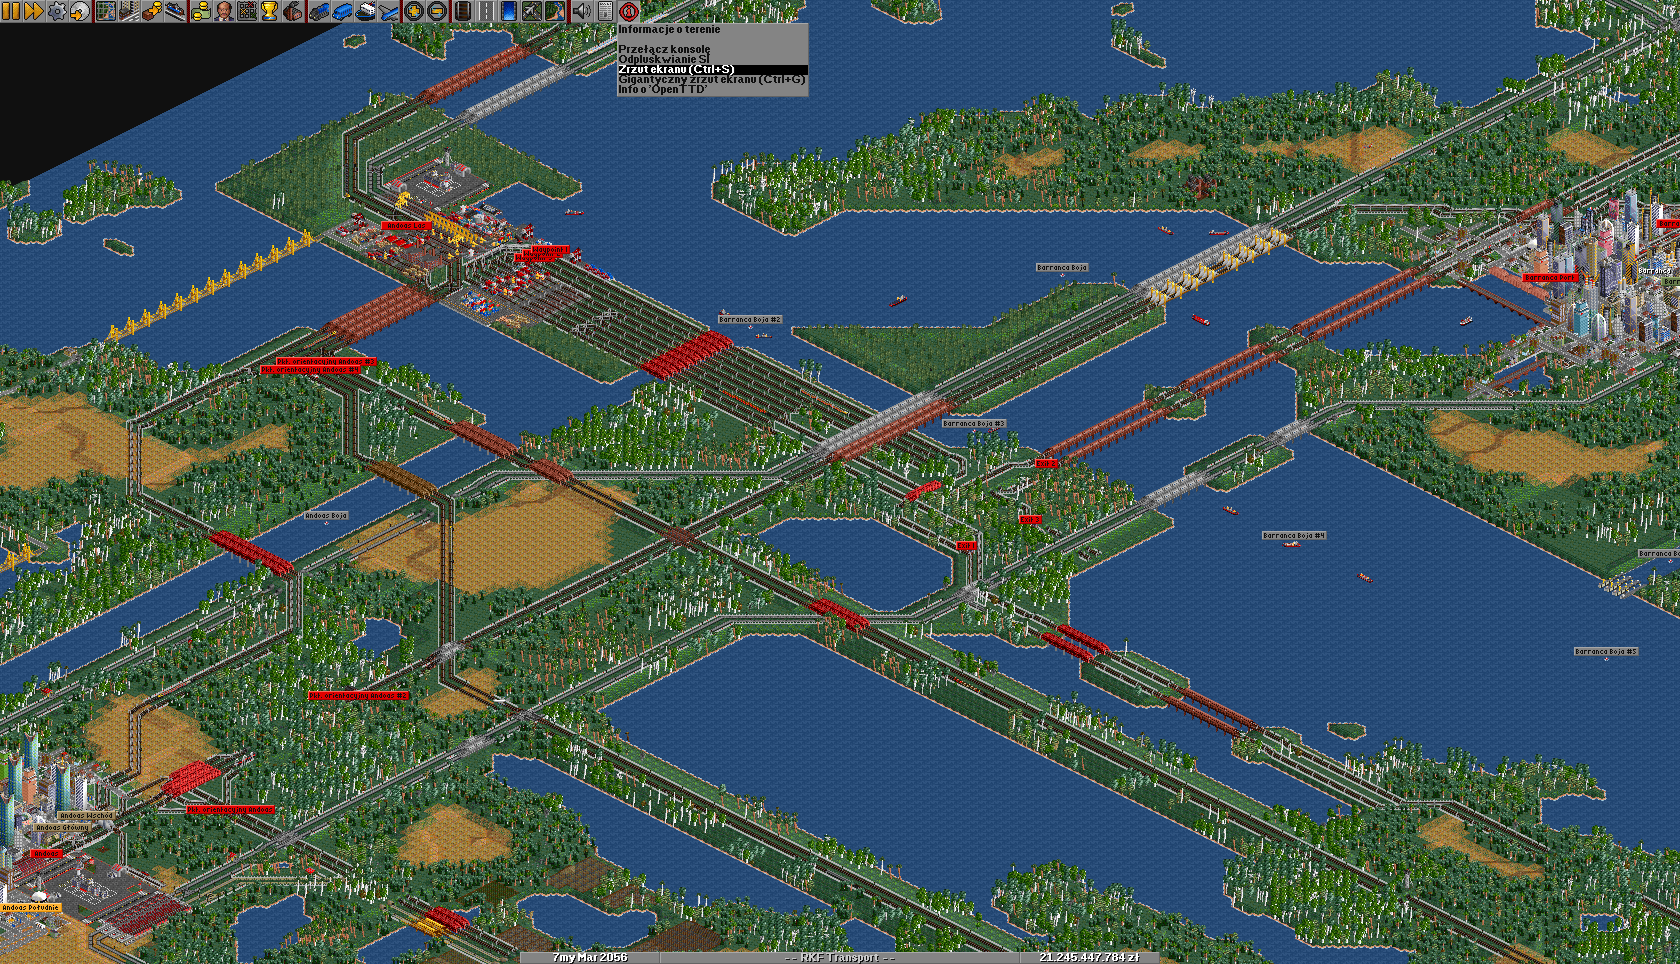 At the same time, organize the rail network to keep a good flow.